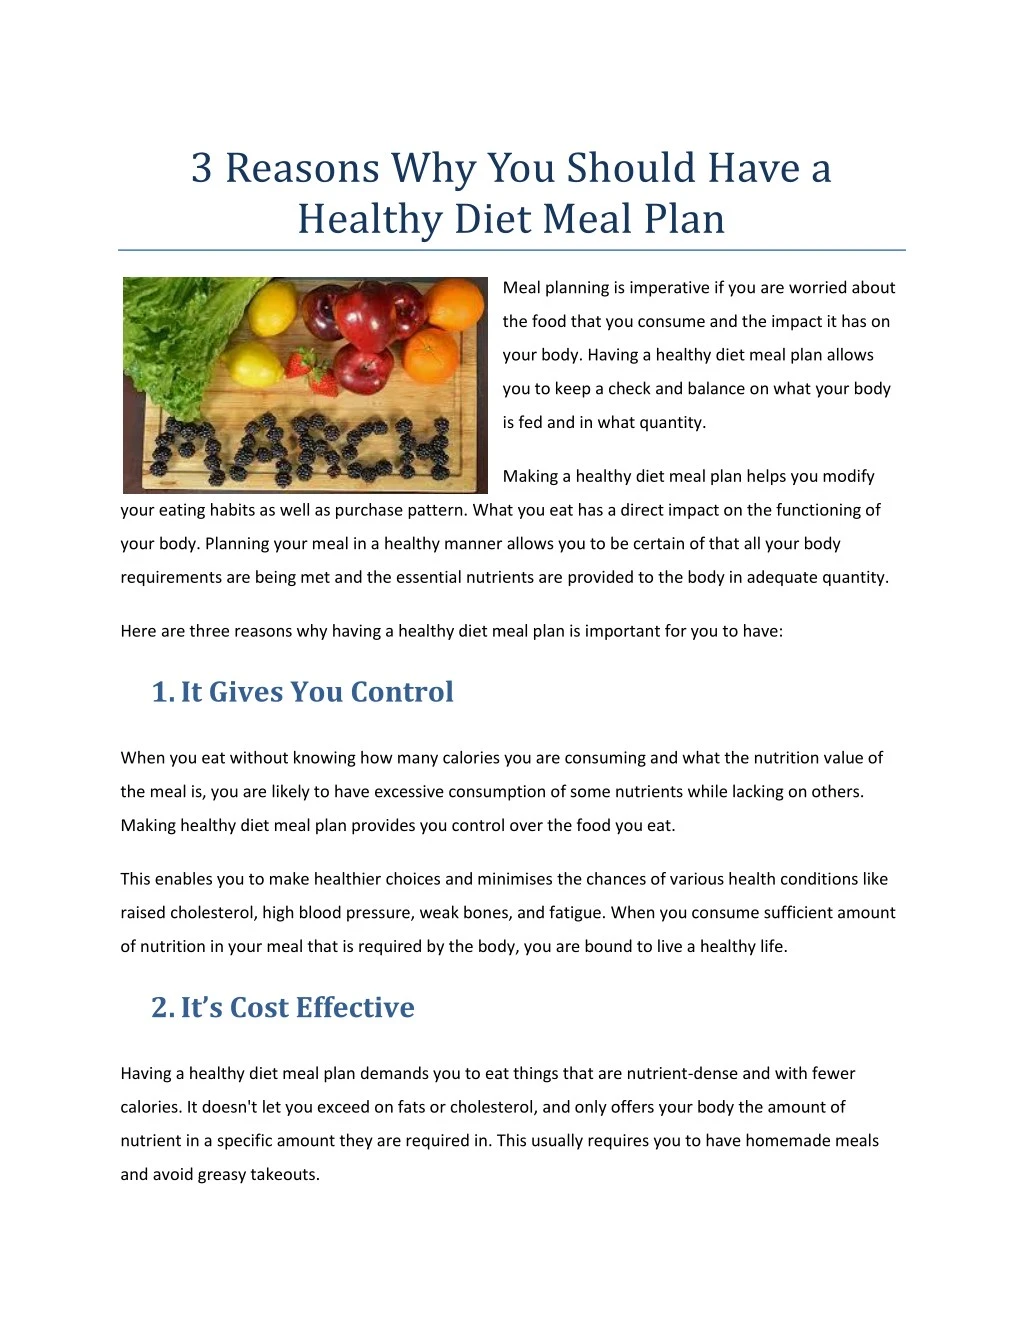 3 reasons why you should have a healthy diet meal